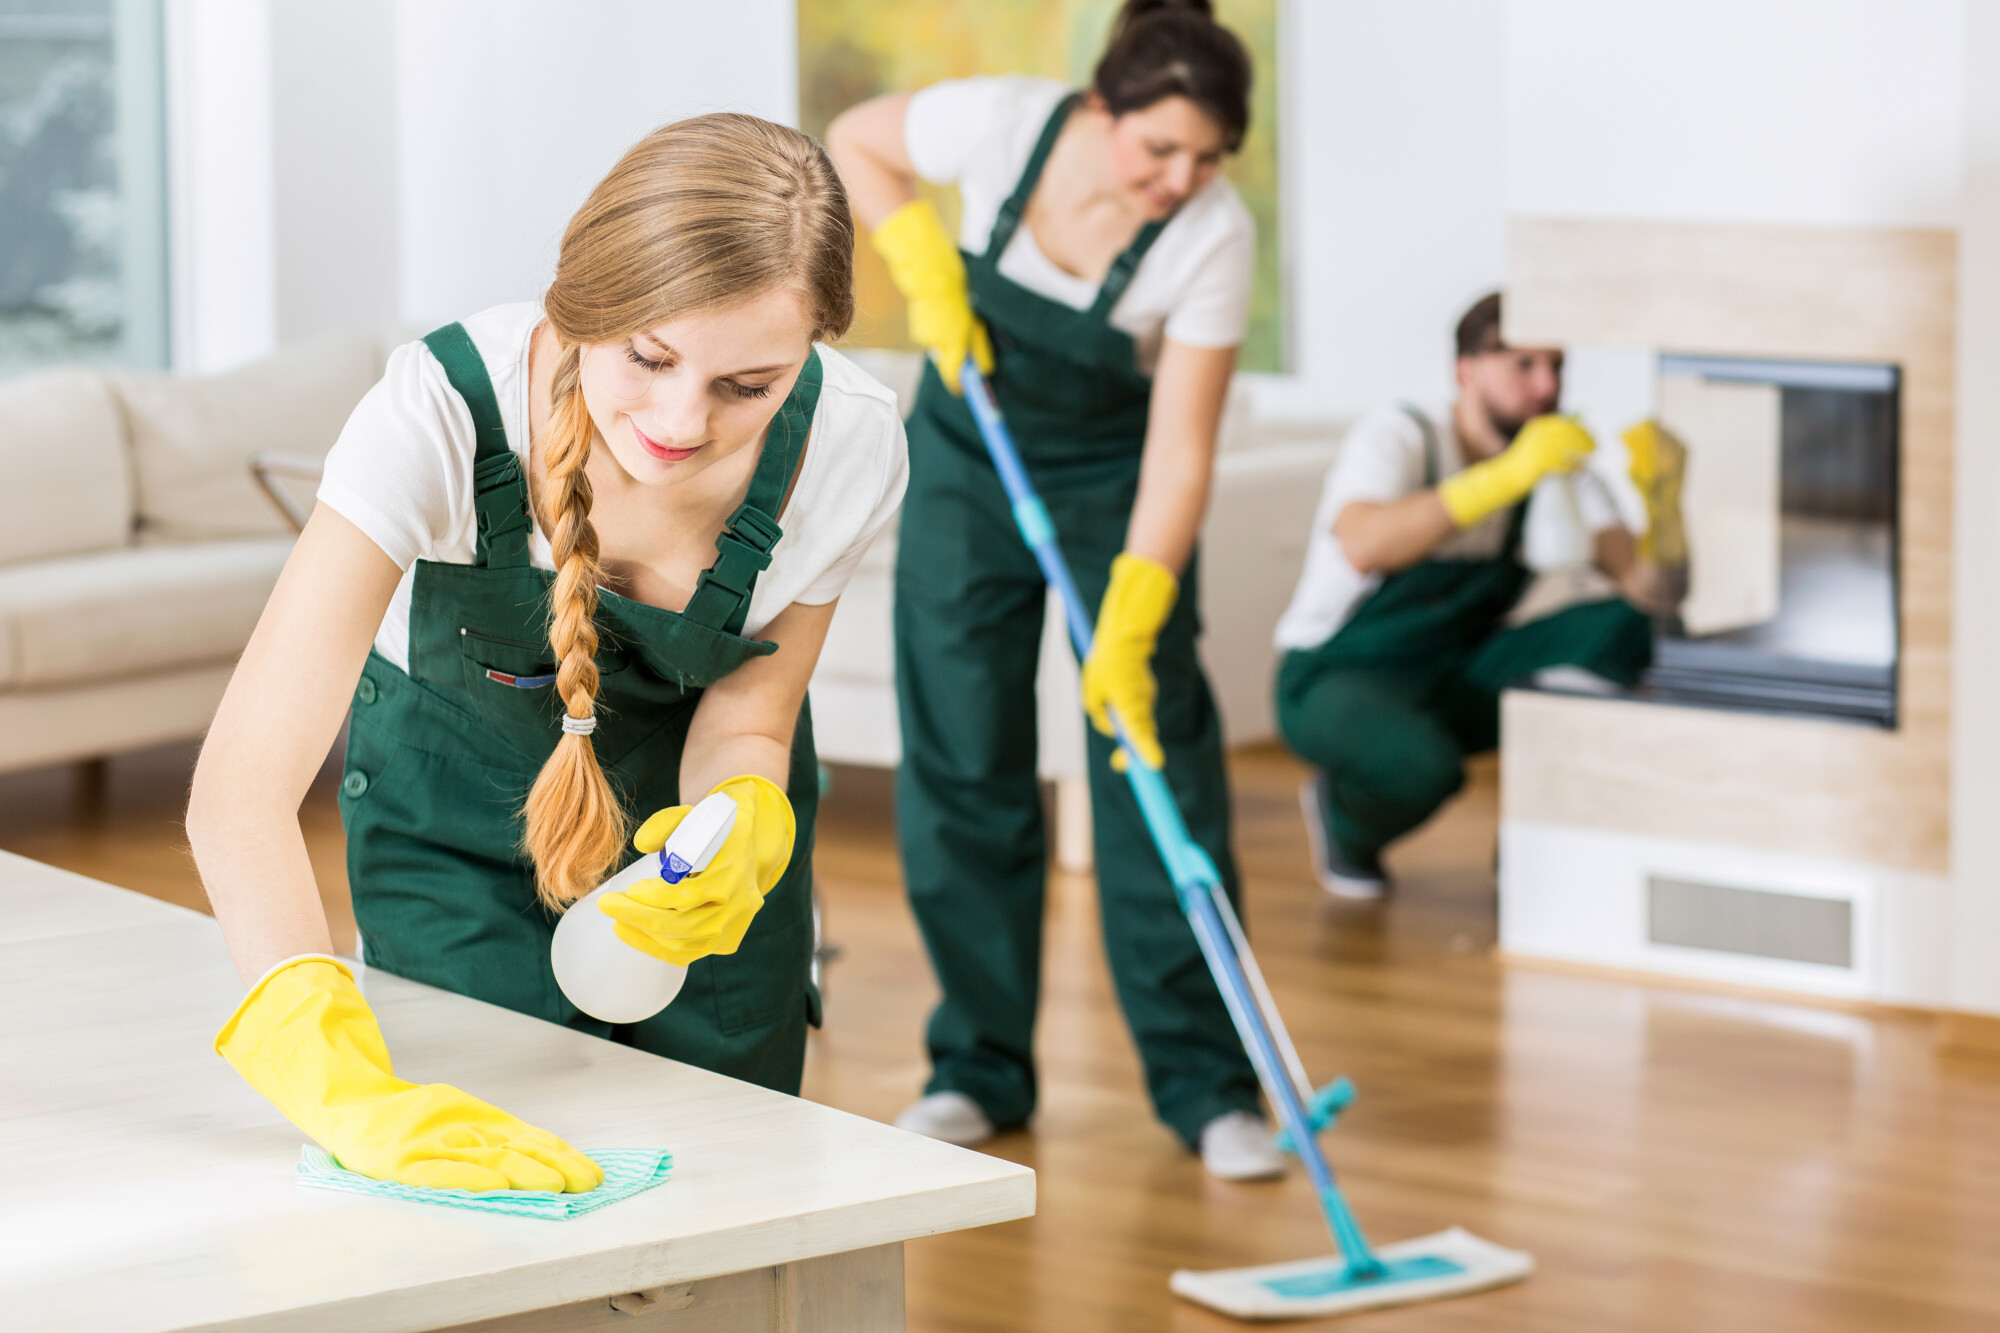 House Cleaner Services Near Me: How To Choose the Right One